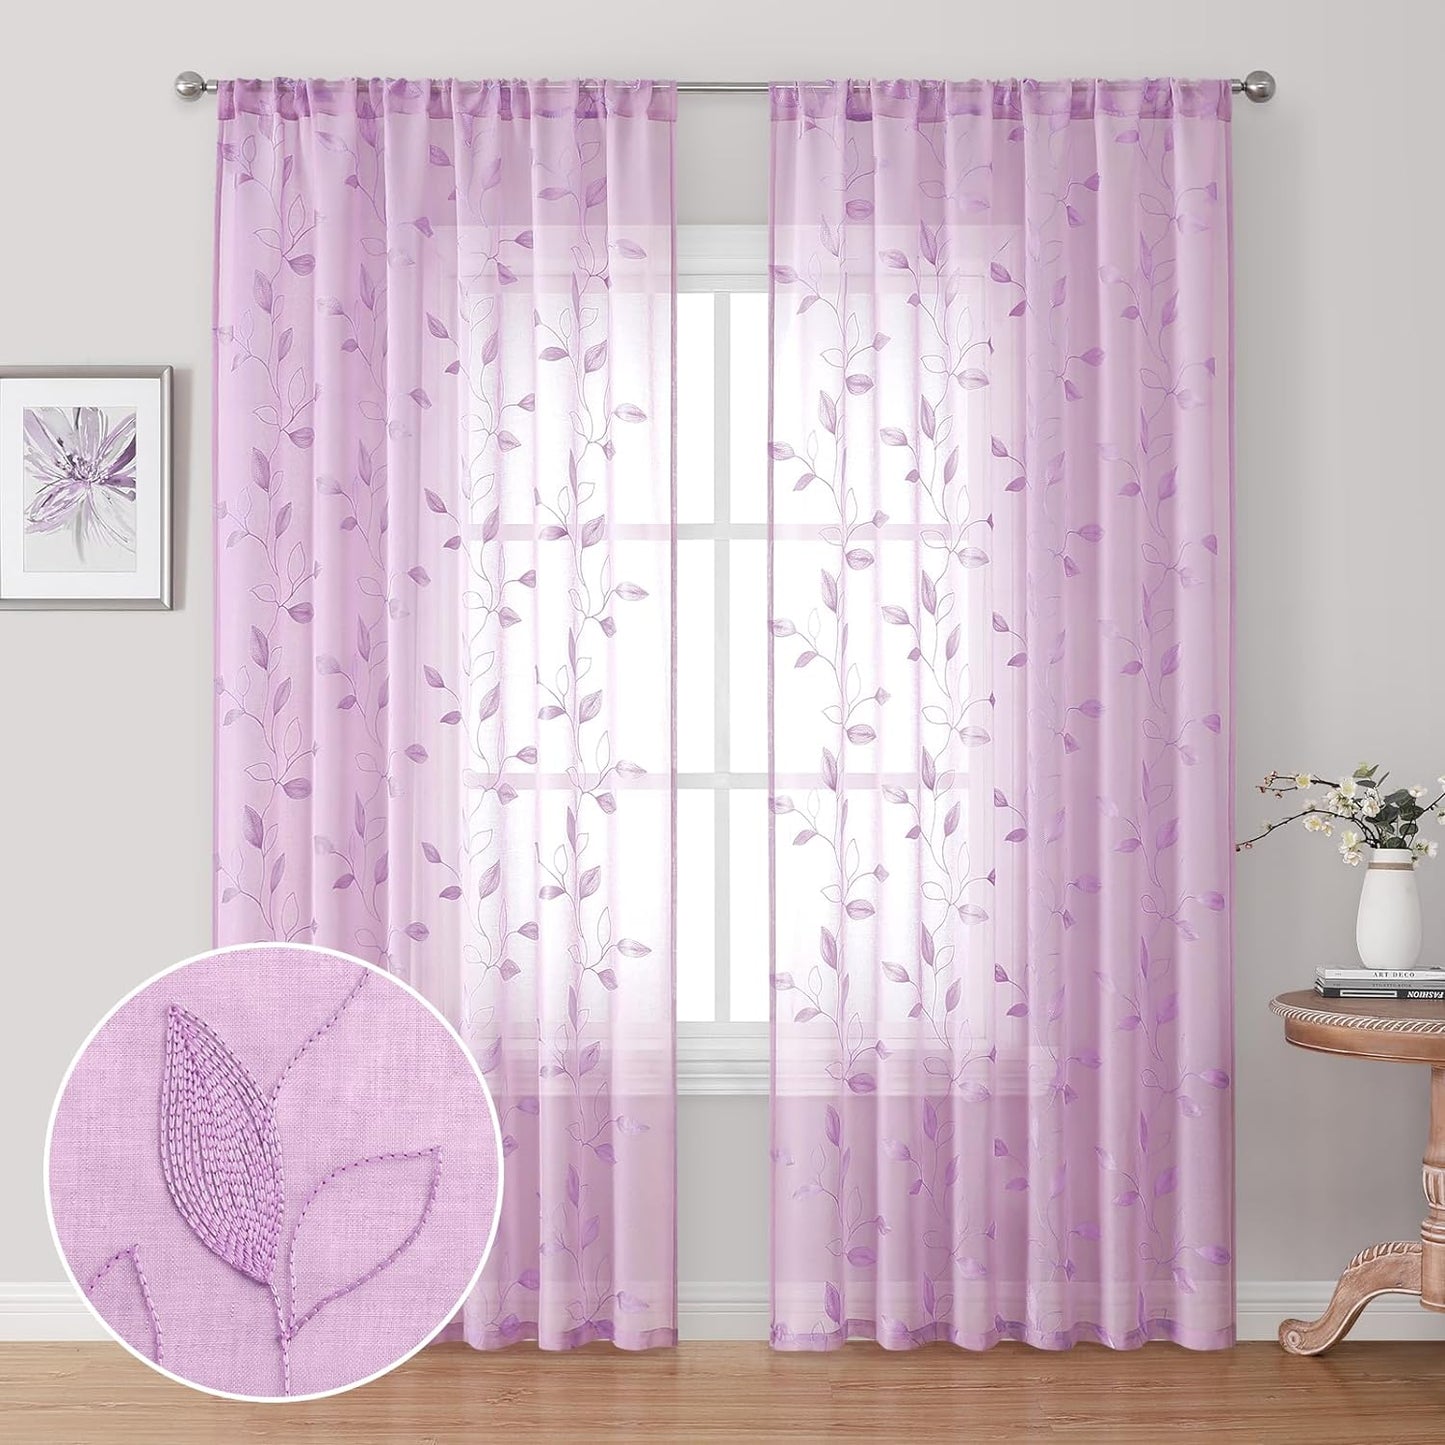 HOMEIDEAS Sage Green Sheer Curtains 52 X 63 Inches Length 2 Panels Embroidered Leaf Pattern Pocket Faux Linen Floral Semi Sheer Voile Window Curtains/Drapes for Bedroom Living Room  HOMEIDEAS Purple W52" X L96" 